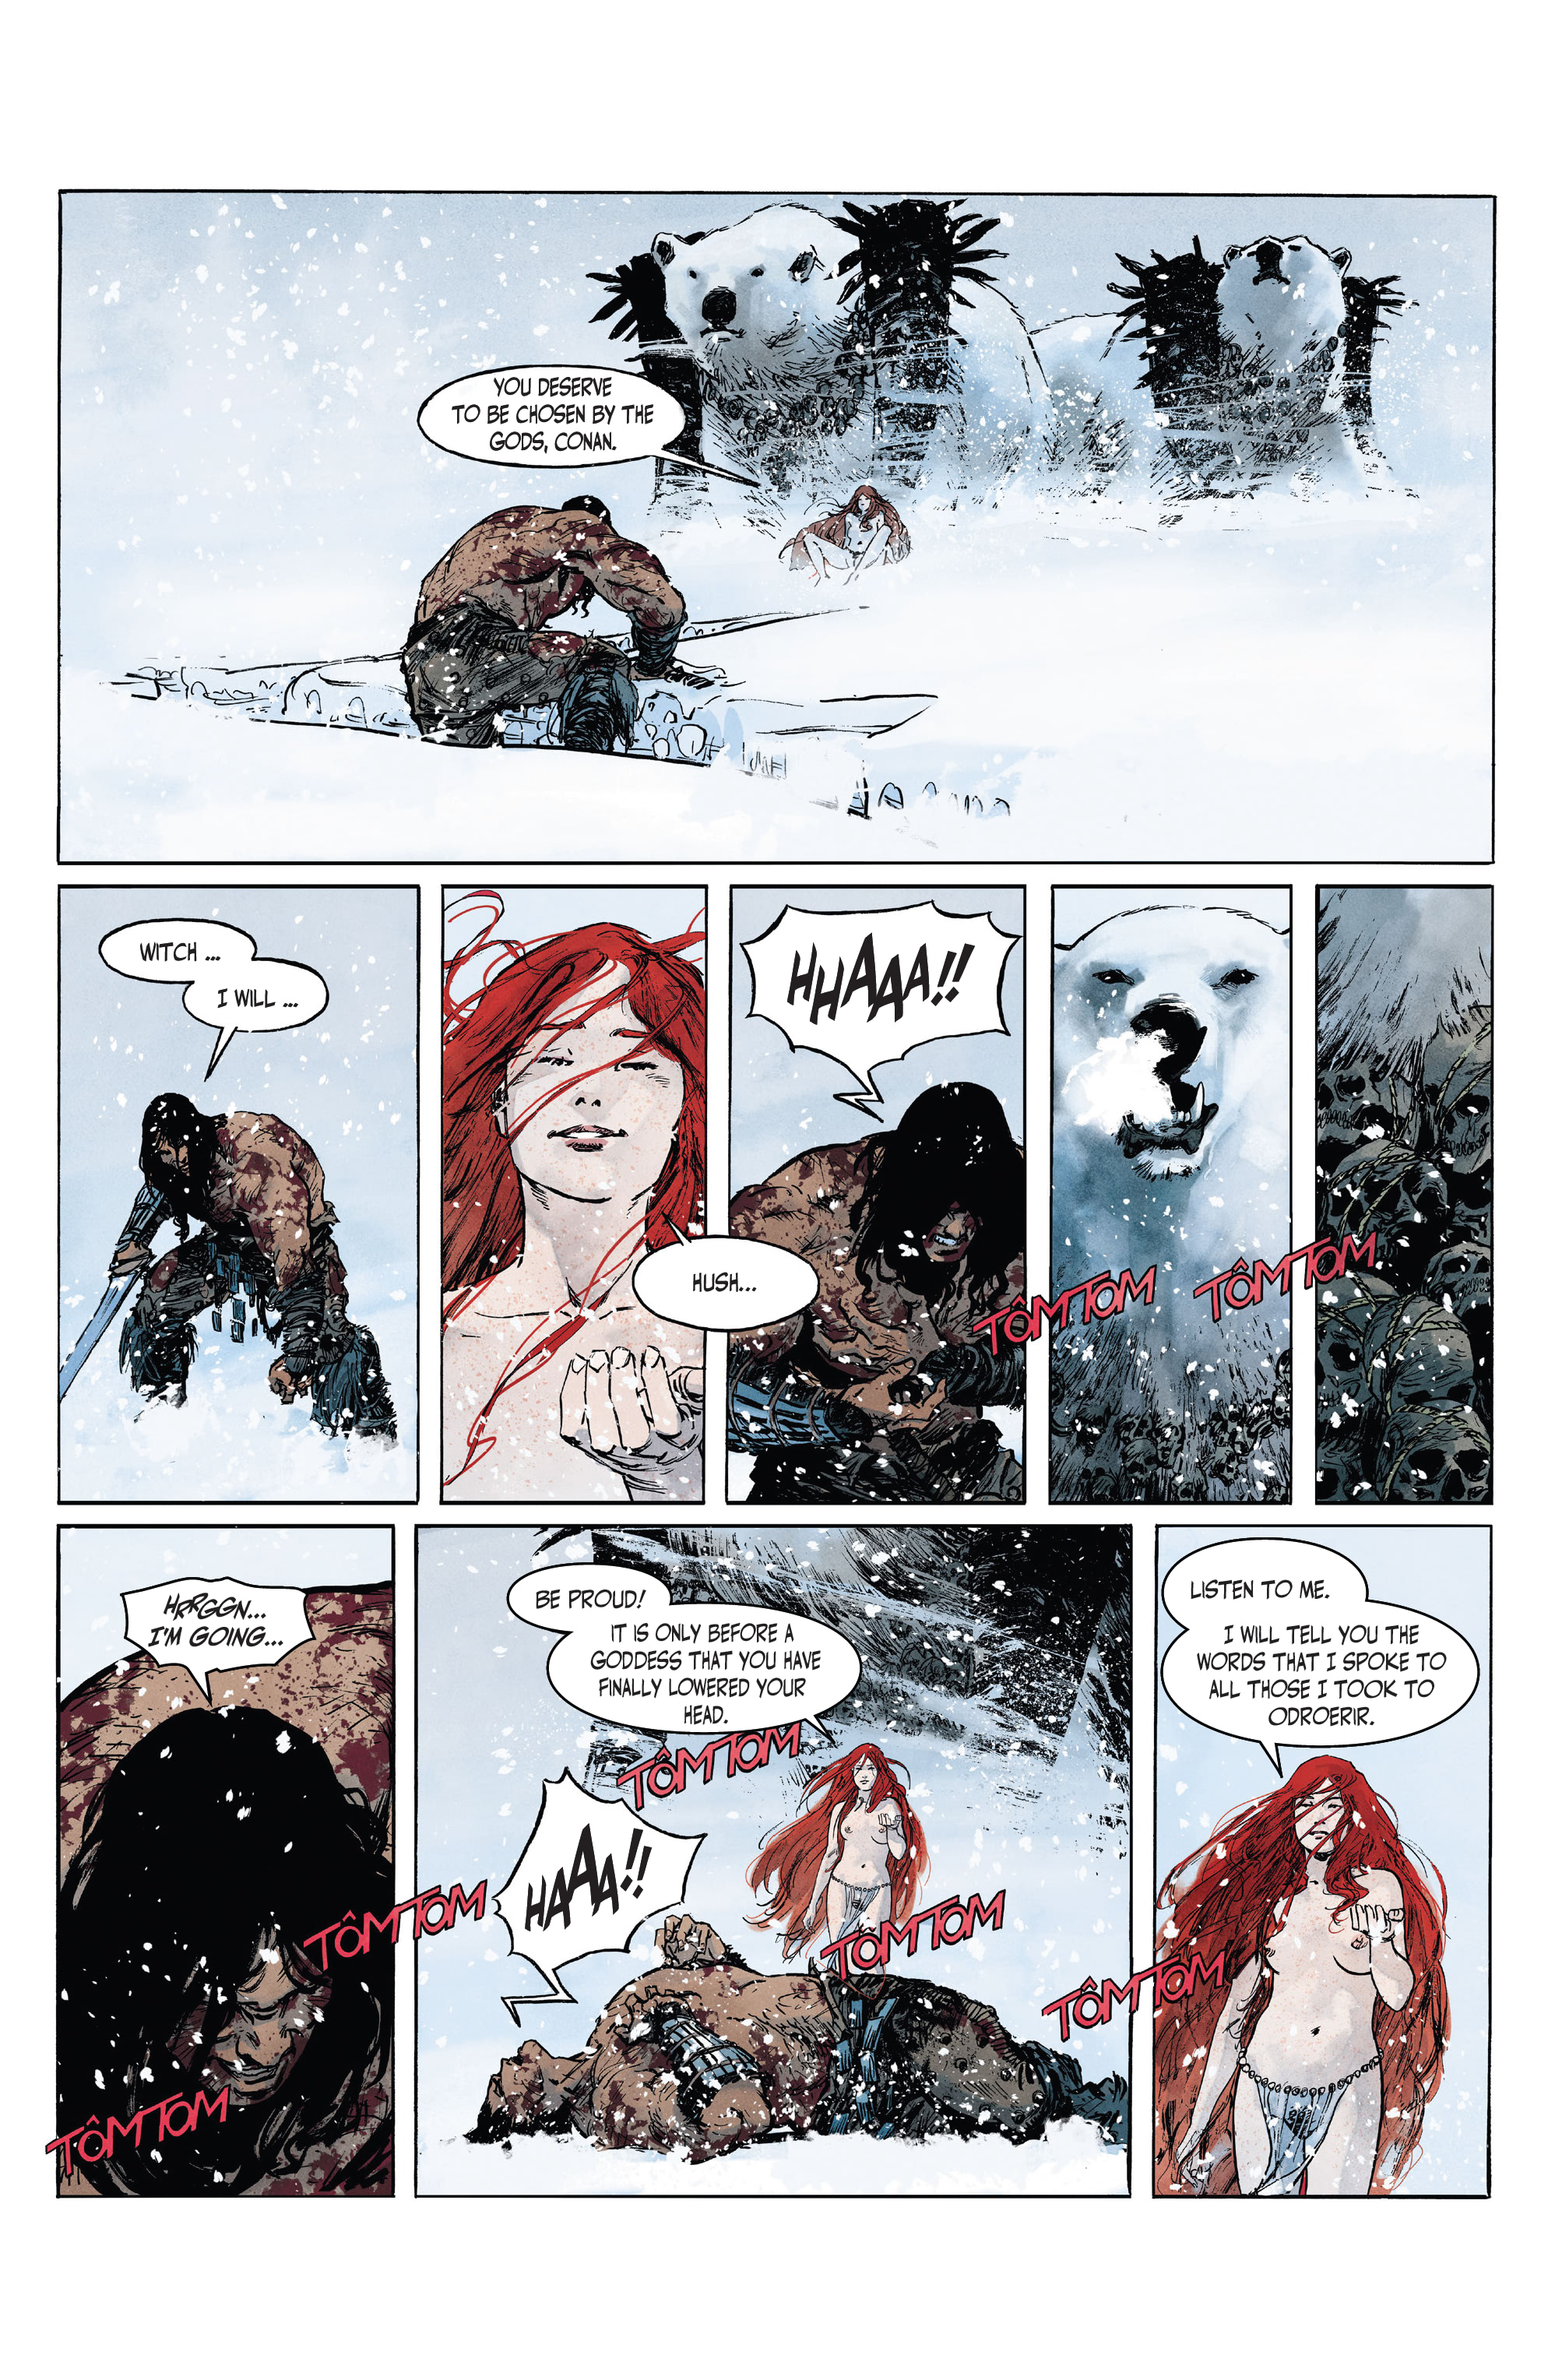 The Cimmerian: The Frost-Giant's Daughter (2020-): Chapter 3 - Page 3